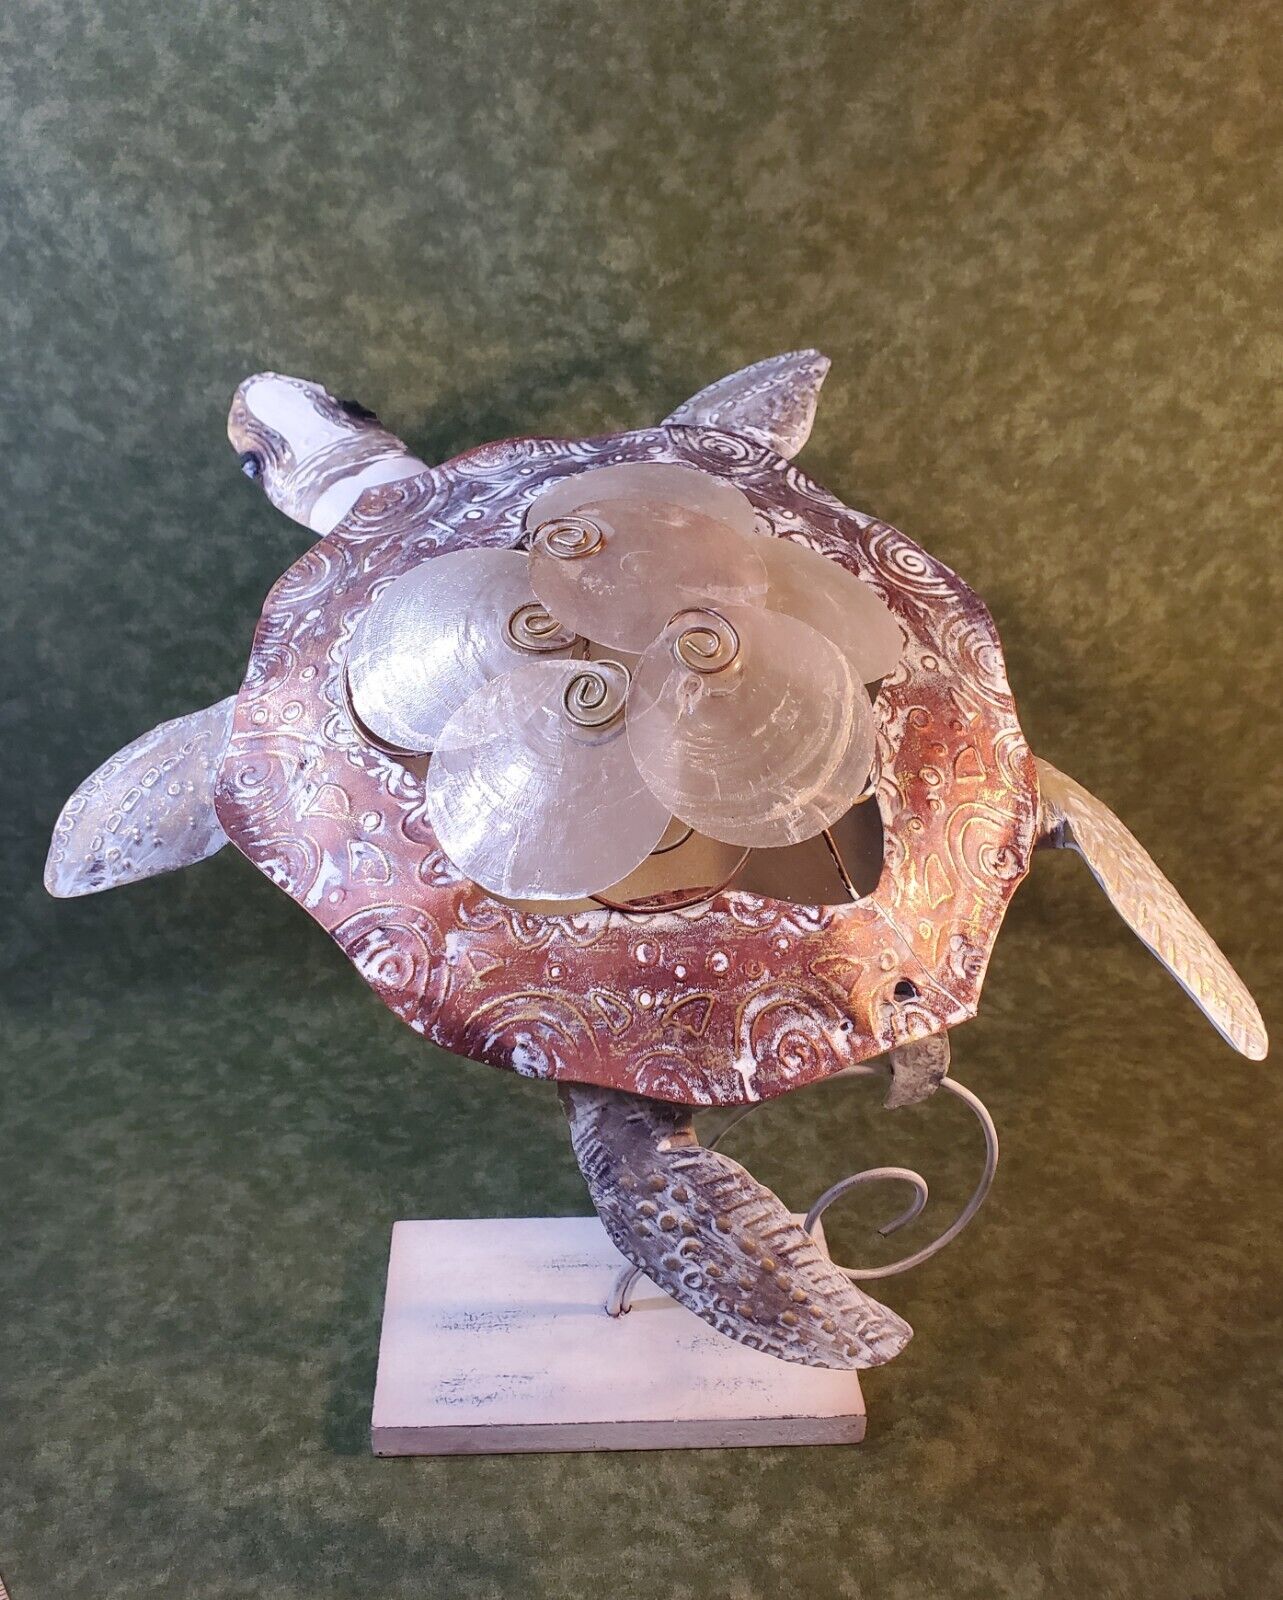 Sea Turtle On Pedestal-Made With Stamped Metal And Capiz. Ocean Coastal Decor